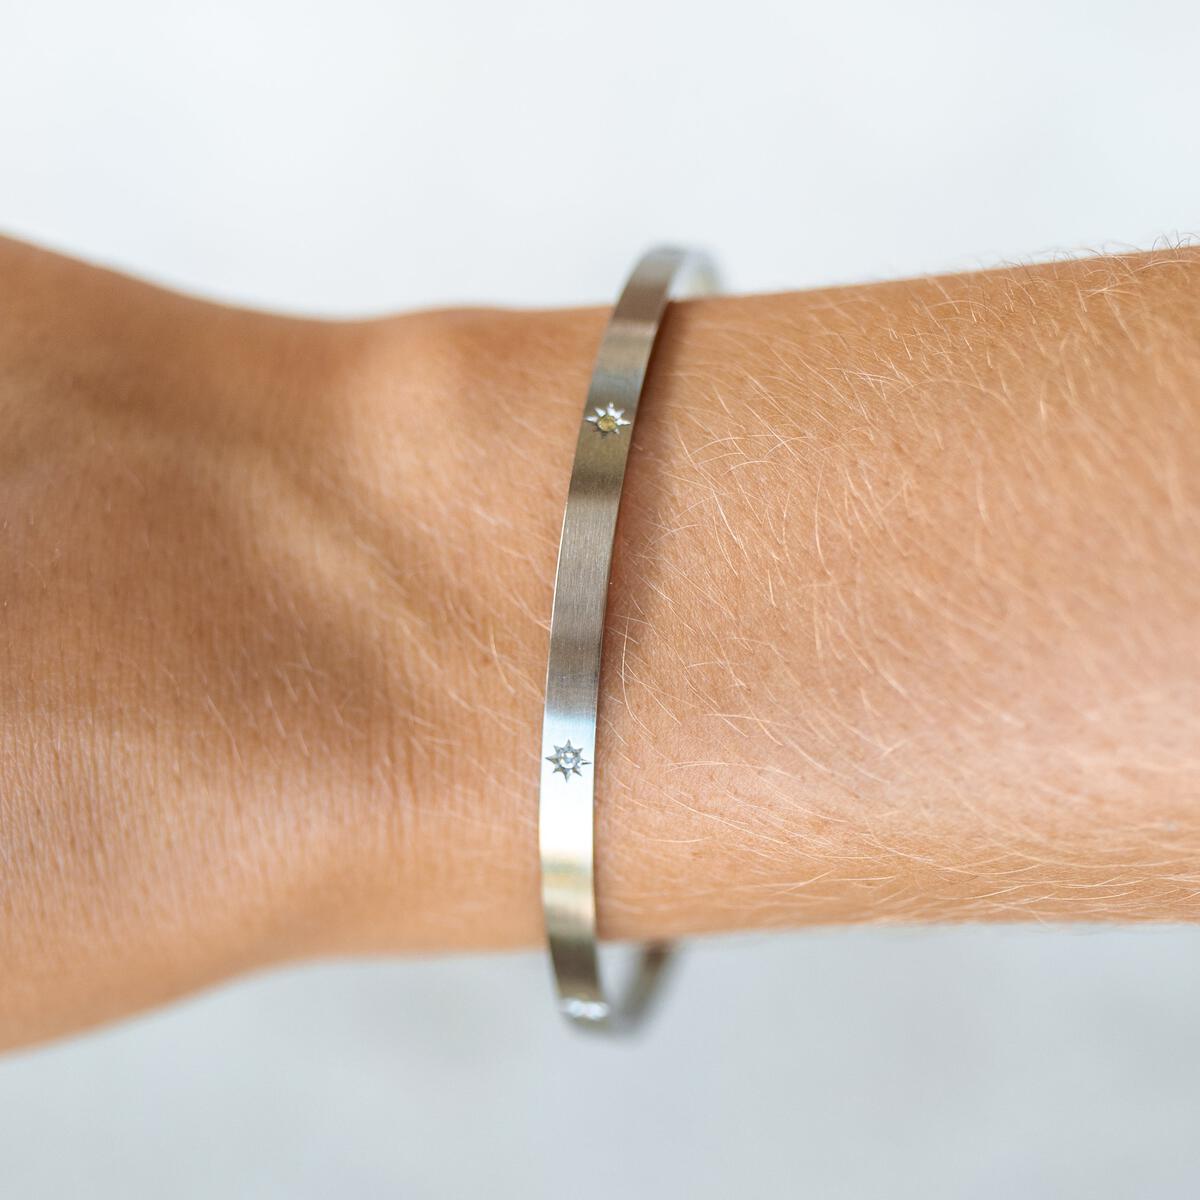 Star Crossed Silver Bangle. By ALCO. Free Delivery